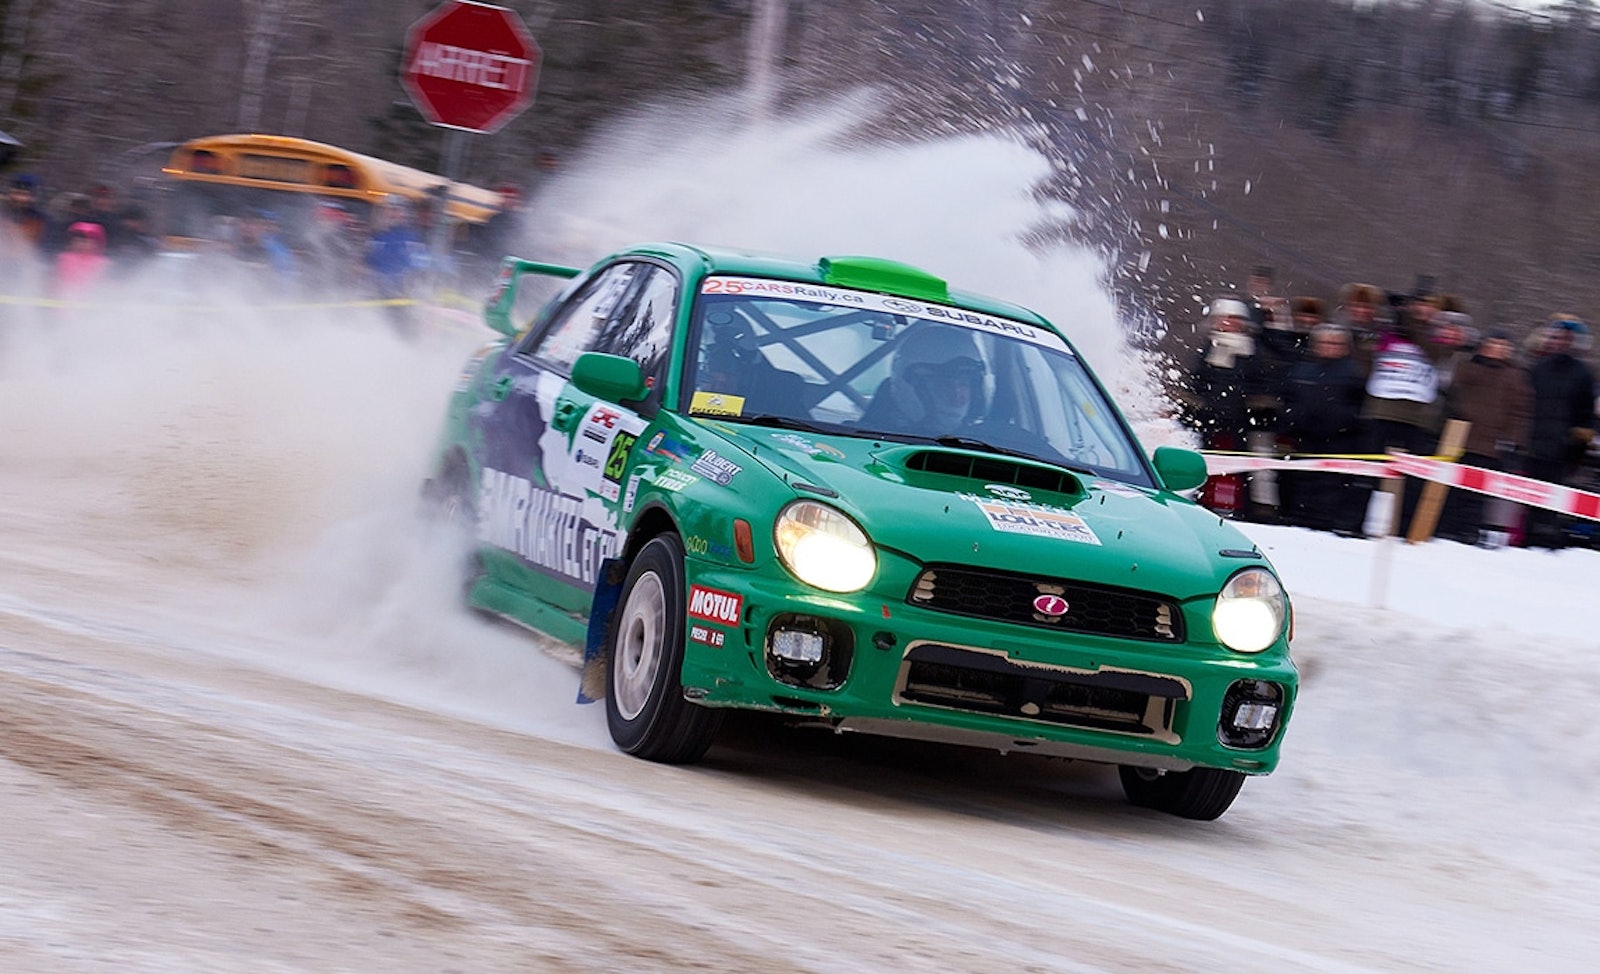 Canada is looking to bring the World Rally Championship to it’s snowy stages.